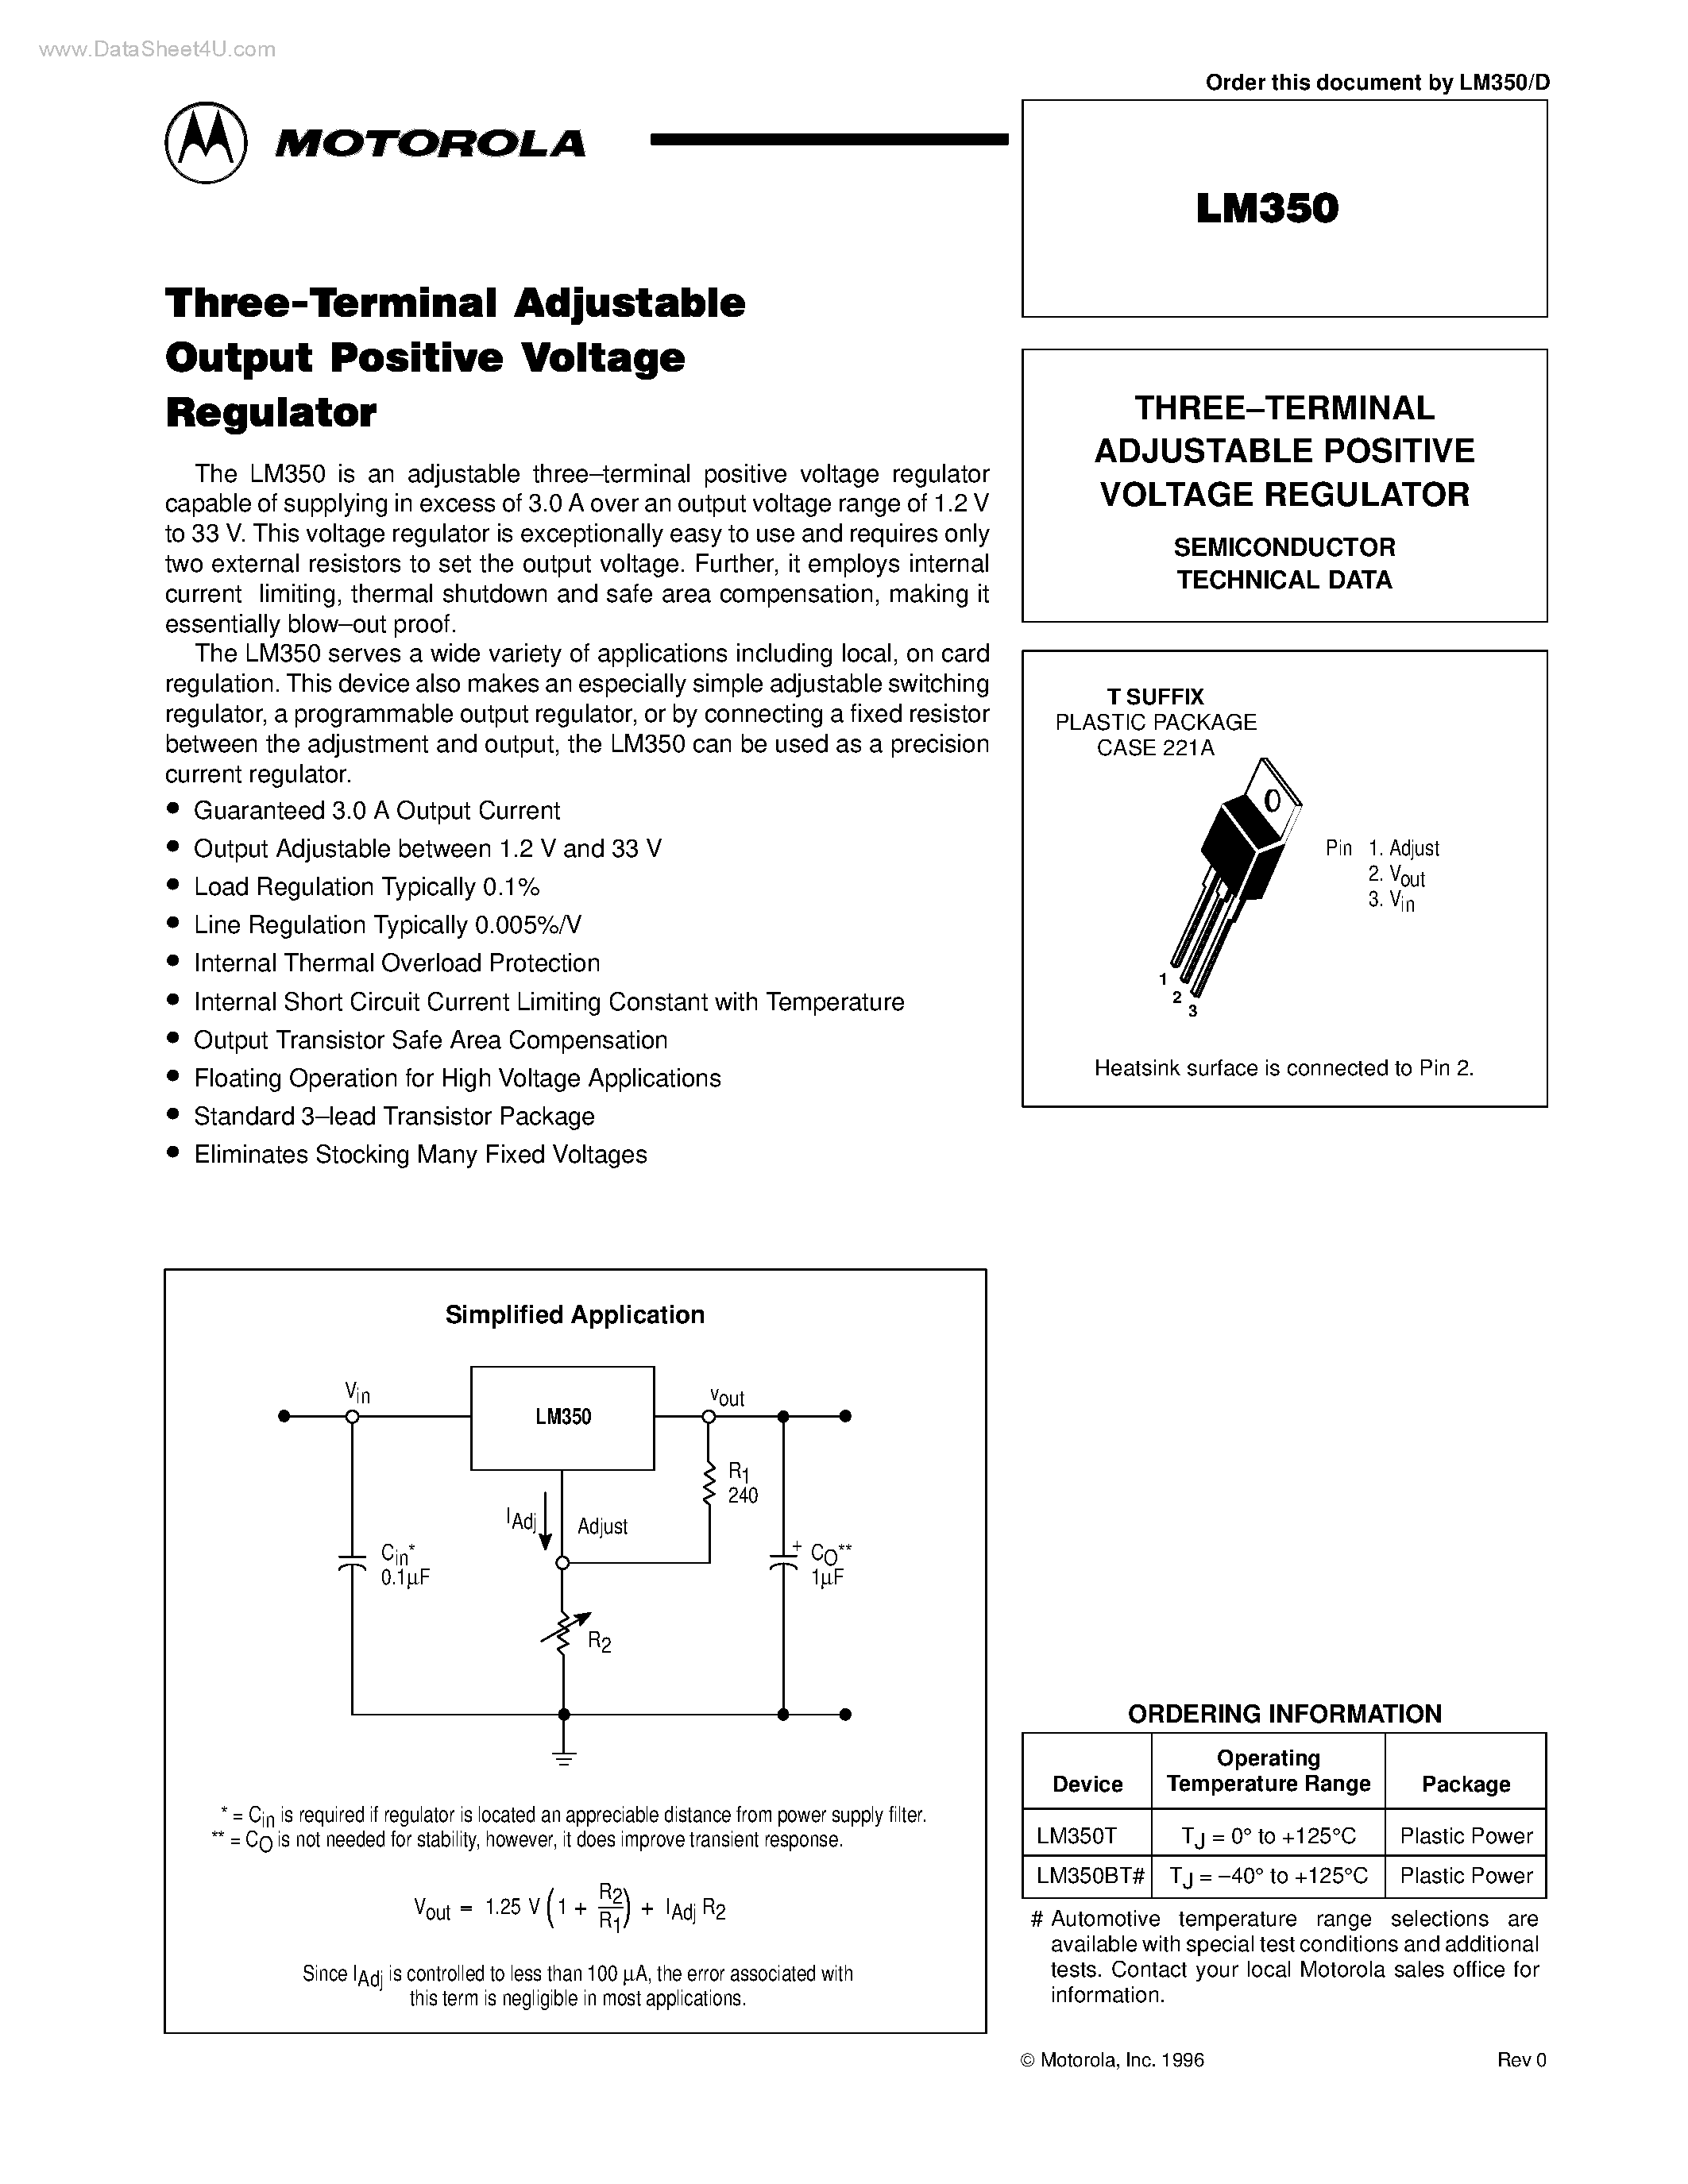 Datasheet LM350BT - Search -----> LM350 page 1